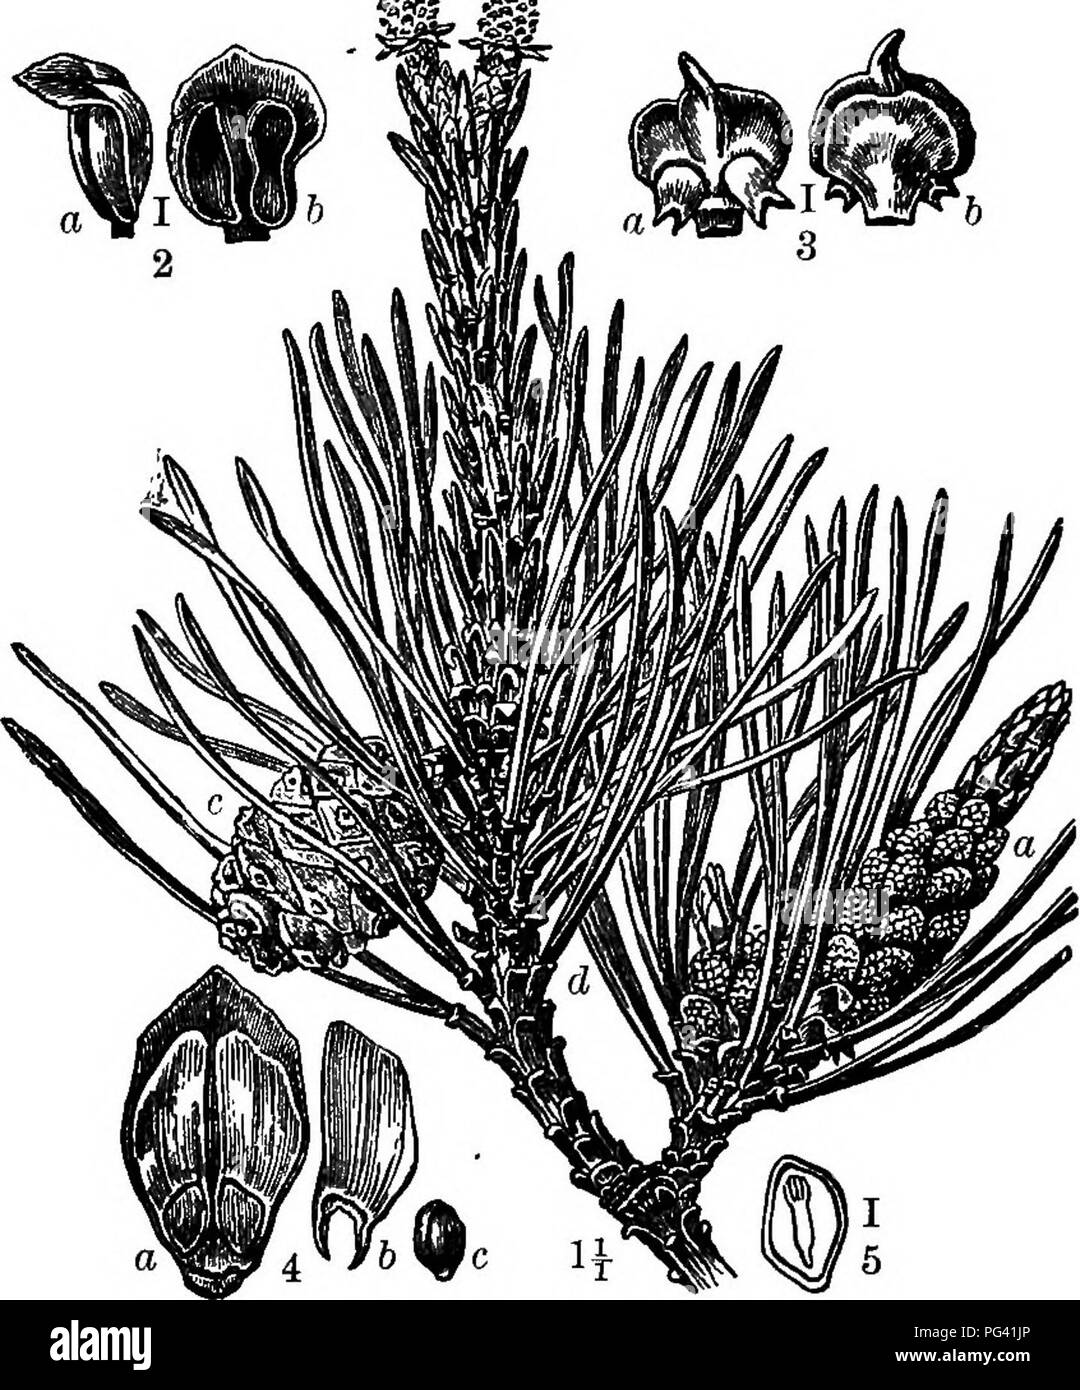 . Elements of botany. Botany; Botany. 8 ELEMENTS OF BOTANY. ft. (P. rigida), Northern Pitch Pine. A stout tree, 30-80 ft. high, with rough scaly bark. Leaves in threes, 3-5 in. long, stifE and flattened. Cones ovate-conical, 2-3 in. long, their scales tipped with a short, abruptly curvgd spine. Wood hard, coarse and resinous, mainly used for fuel. ••&amp; ^ i«. Fig. 209. — Scotch Pine (P. sylvestris). 1, a twig allowing ; a, staminate catkins ; b, pistillate catkins ; c, a cone ; d, needles. 2, an anther, a, side view ; b, outer surface, 3, a carpel-scale, «, inner surface; b, outer surface. 4 Stock Photo